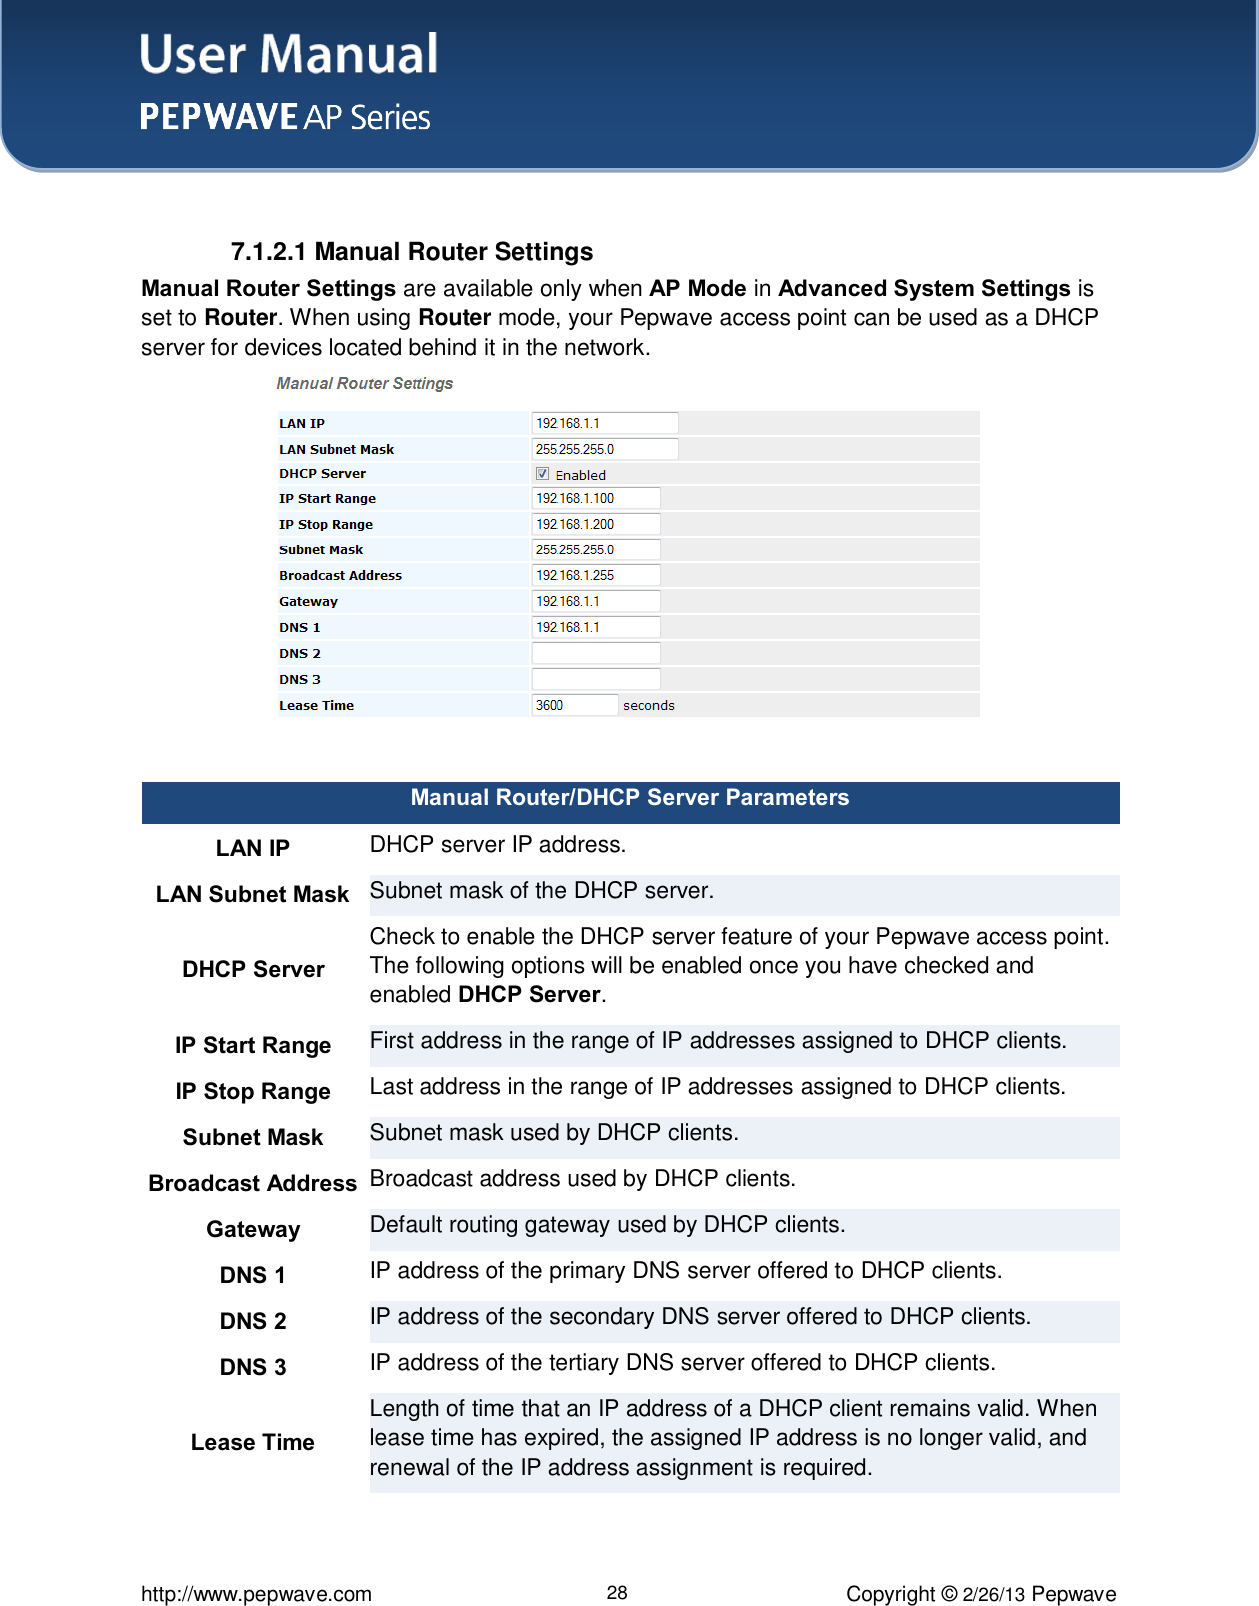 User Manual    http://www.pepwave.com 28 Copyright © 2/26/13 Pepwave   7.1.2.1 Manual Router Settings Manual Router Settings are available only when AP Mode in Advanced System Settings is set to Router. When using Router mode, your Pepwave access point can be used as a DHCP server for devices located behind it in the network.   Manual Router/DHCP Server Parameters LAN IP DHCP server IP address. LAN Subnet Mask Subnet mask of the DHCP server. DHCP Server Check to enable the DHCP server feature of your Pepwave access point. The following options will be enabled once you have checked and enabled DHCP Server. IP Start Range First address in the range of IP addresses assigned to DHCP clients. IP Stop Range Last address in the range of IP addresses assigned to DHCP clients. Subnet Mask Subnet mask used by DHCP clients. Broadcast Address Broadcast address used by DHCP clients. Gateway Default routing gateway used by DHCP clients. DNS 1 IP address of the primary DNS server offered to DHCP clients. DNS 2 IP address of the secondary DNS server offered to DHCP clients. DNS 3 IP address of the tertiary DNS server offered to DHCP clients. Lease Time Length of time that an IP address of a DHCP client remains valid. When lease time has expired, the assigned IP address is no longer valid, and renewal of the IP address assignment is required.   